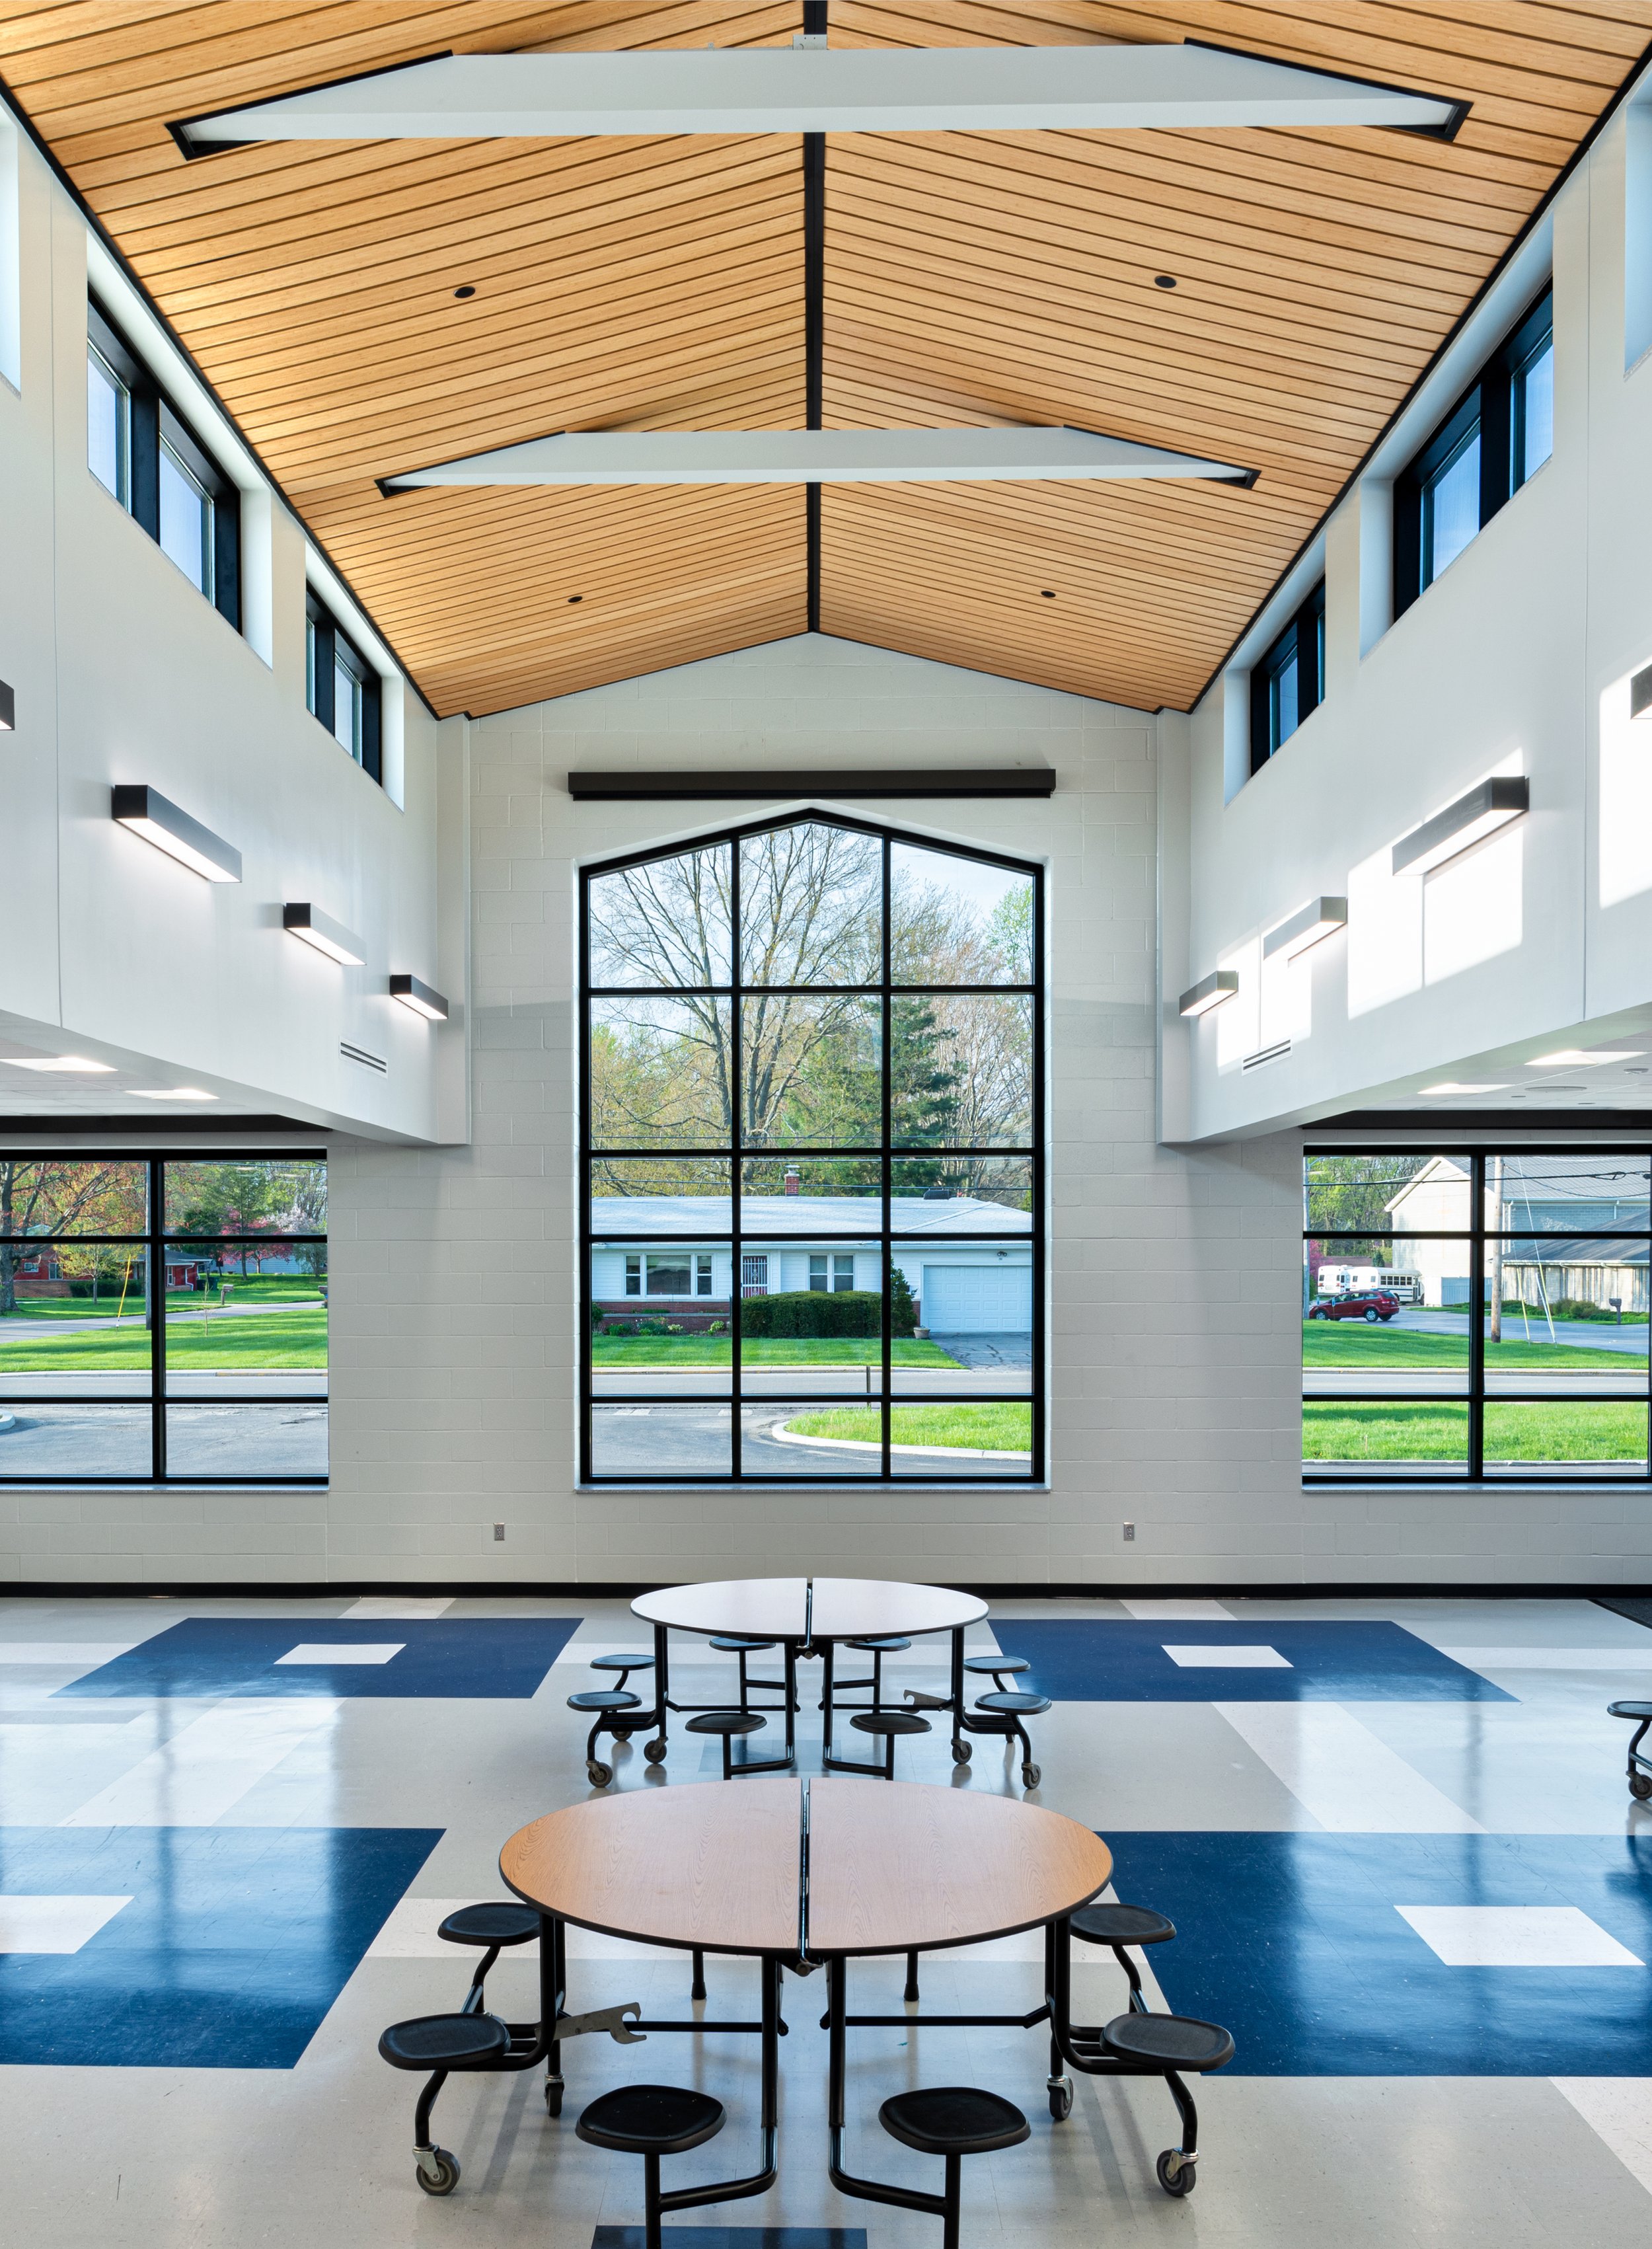 Symmetrical photography of the interior of a school building.